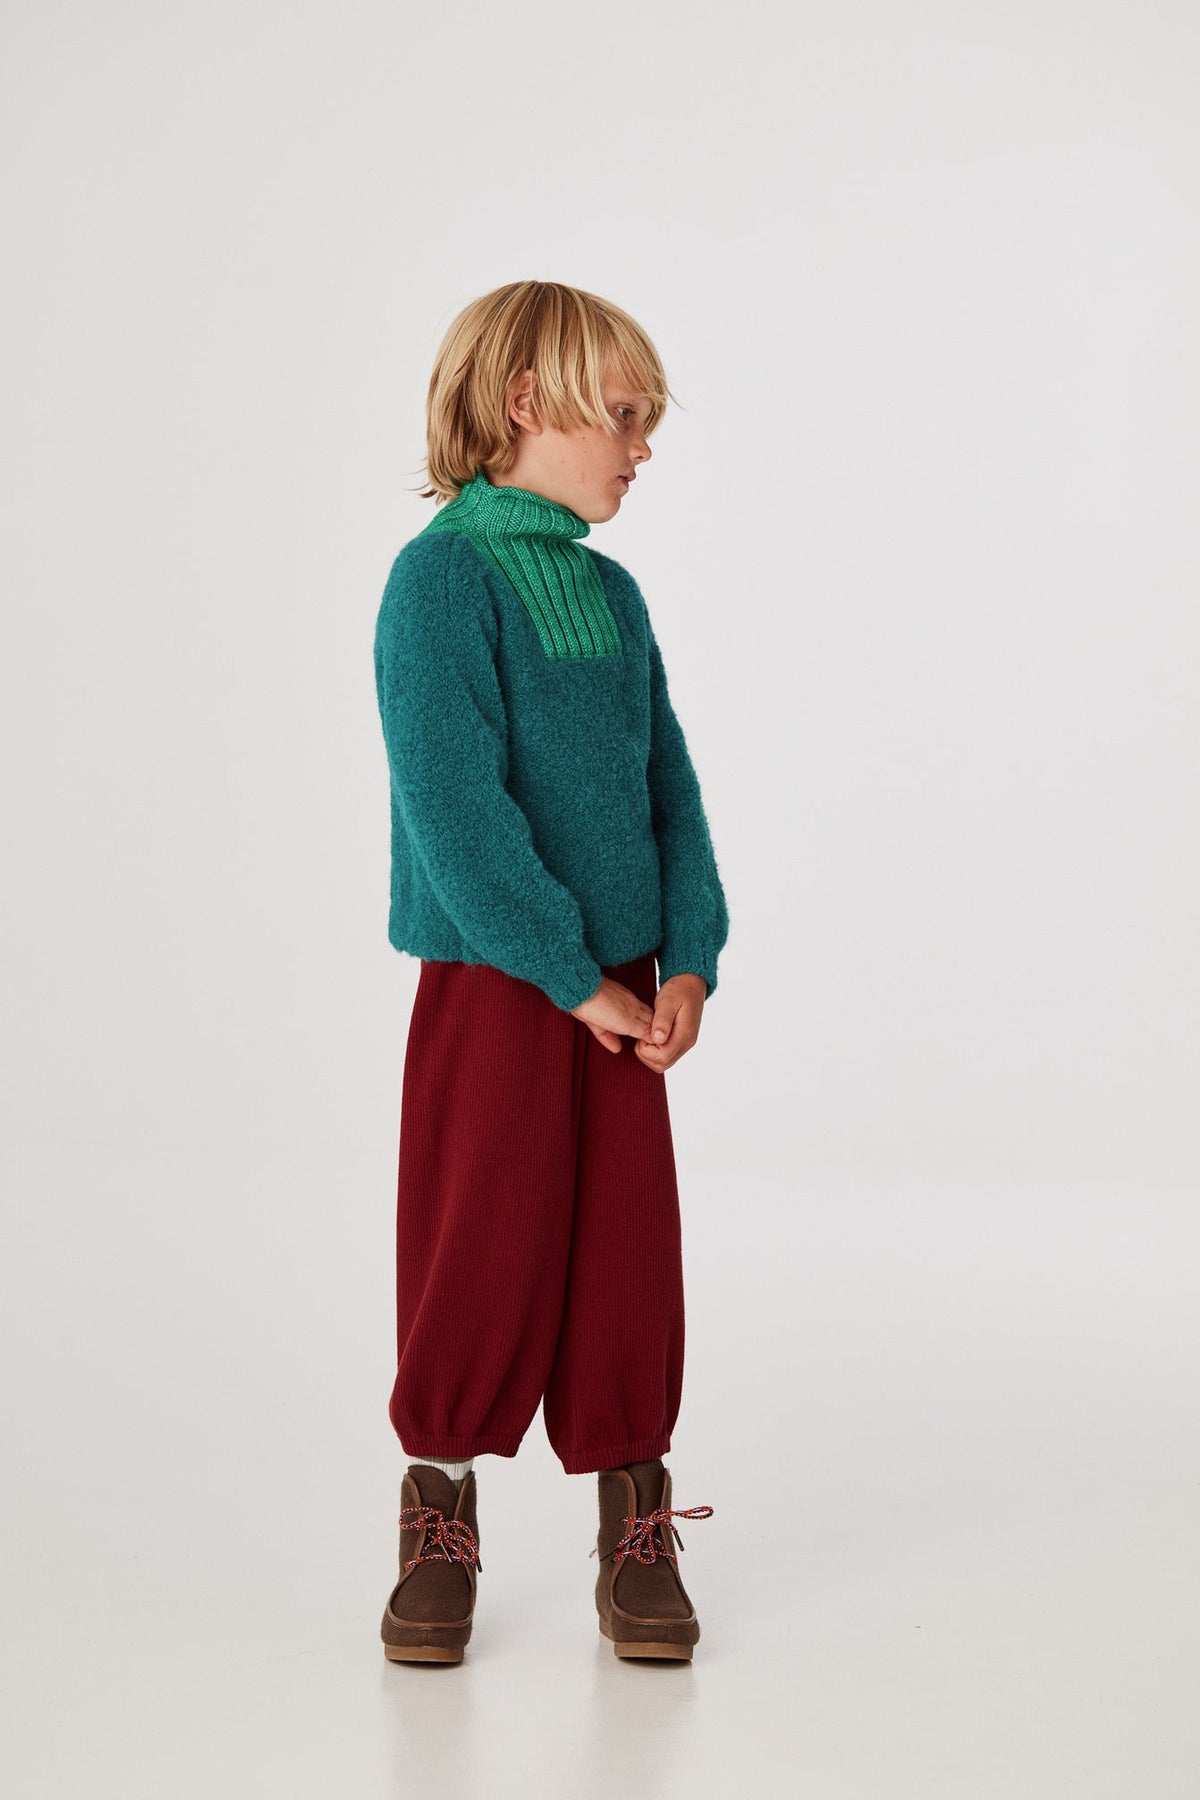 Boucle Ski Sweater - Peacock+Model is 48 inches tall, 48lbs, wearing a size 6-7y